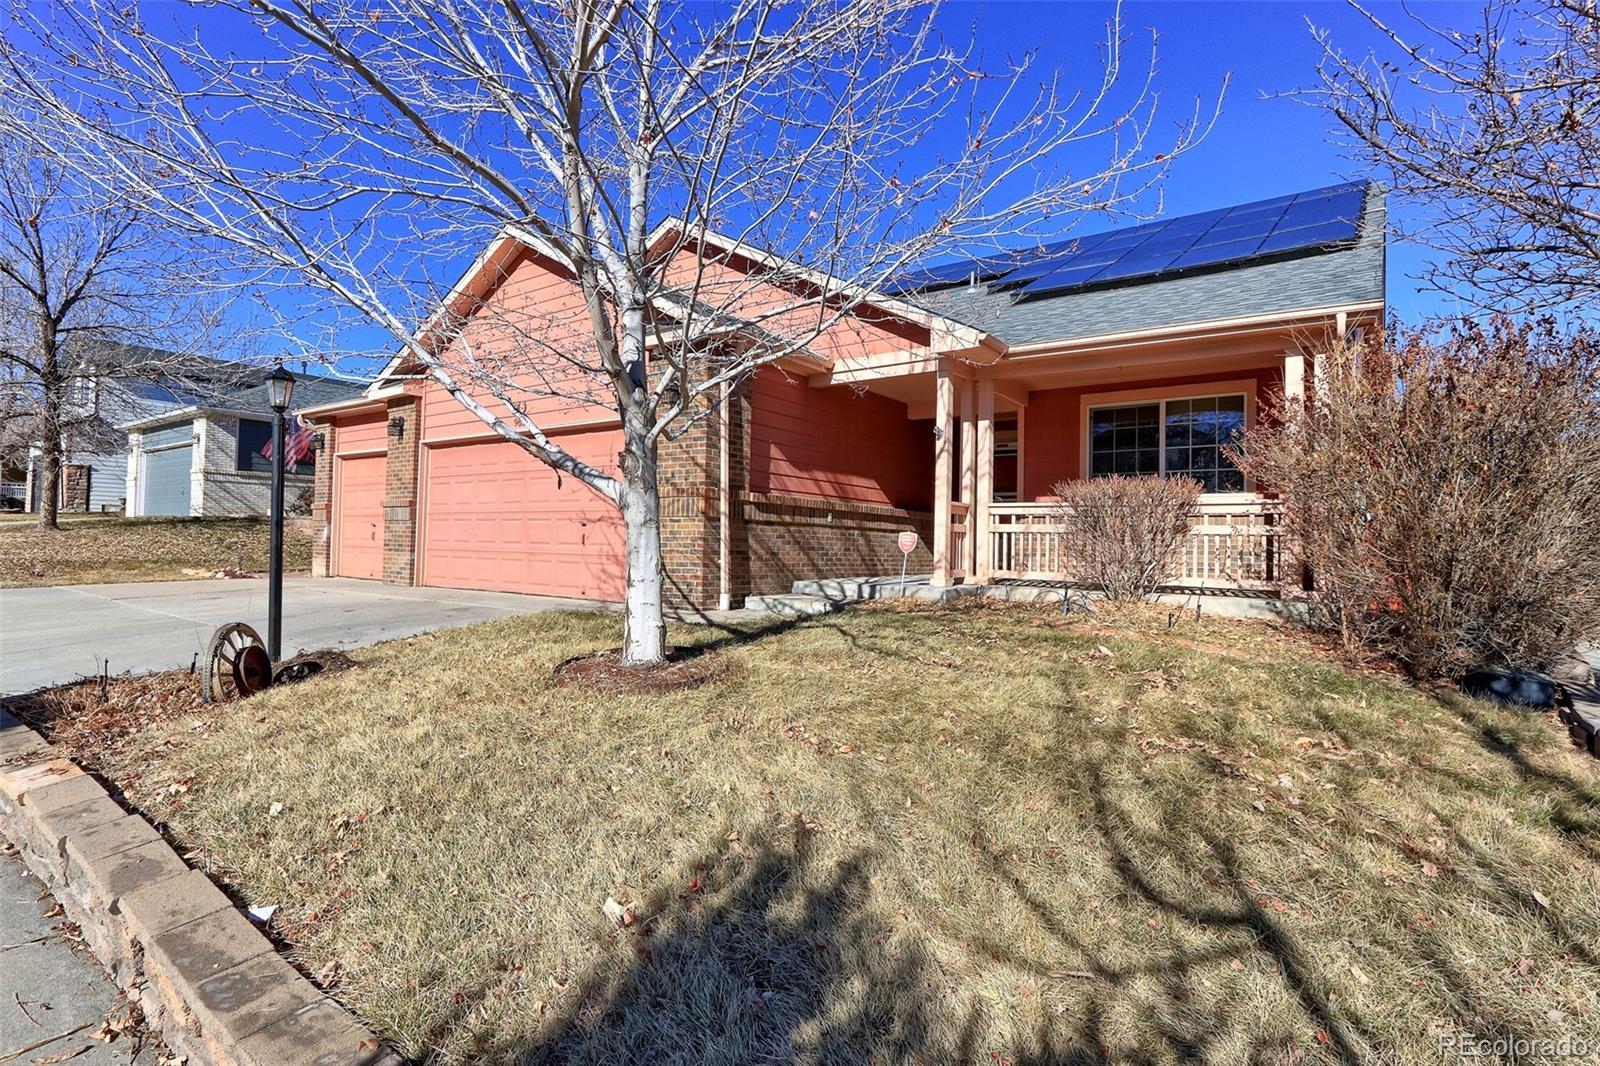 Report Image for 9635 W 14th Place,Lakewood, Colorado